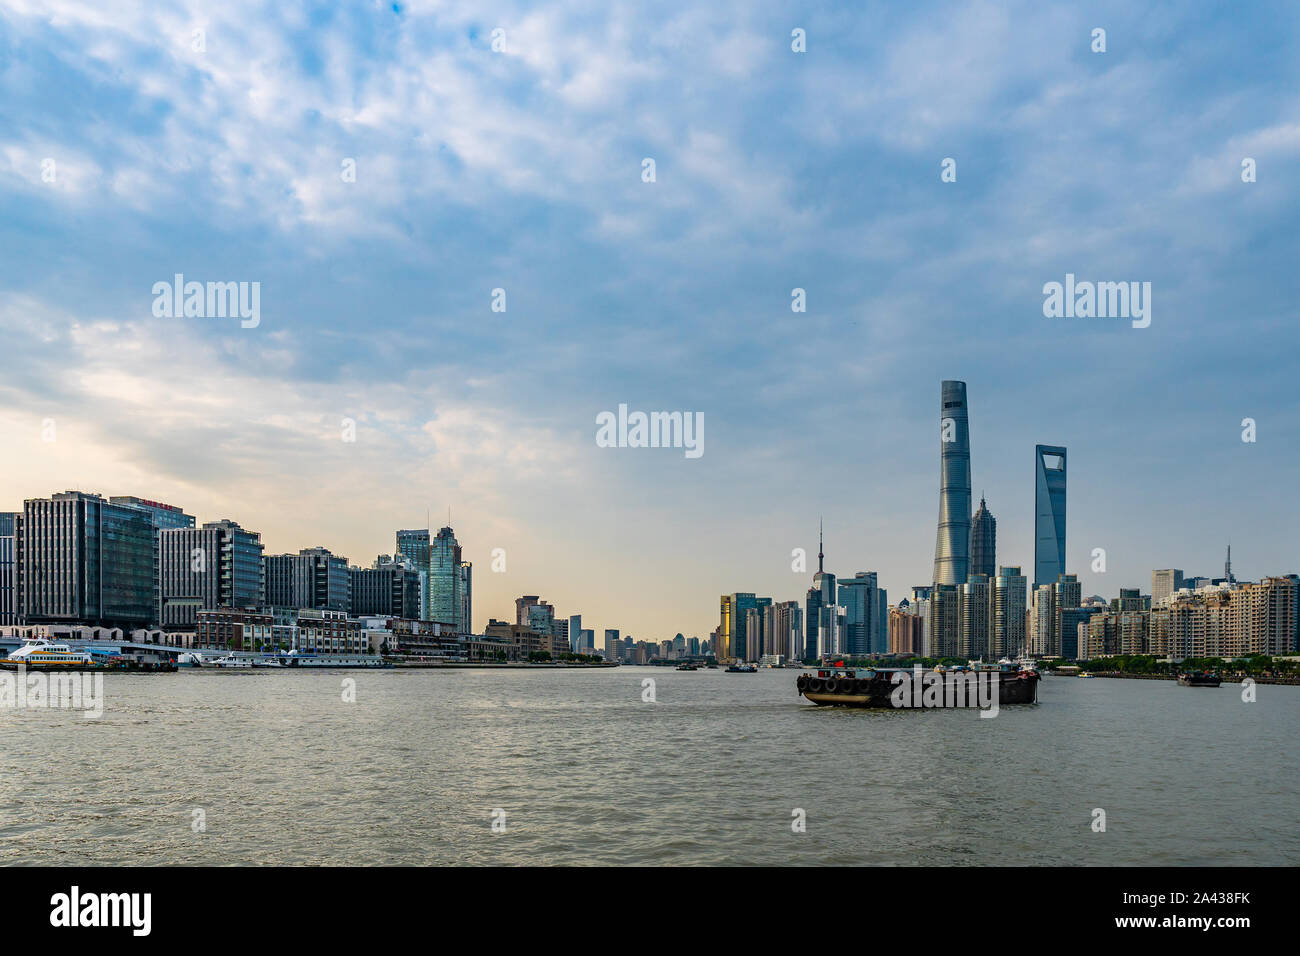 Shanghai Huangpu River Picturesque View of Cargo Freight Ships and Cityscape at Background During Sunset Stock Photo